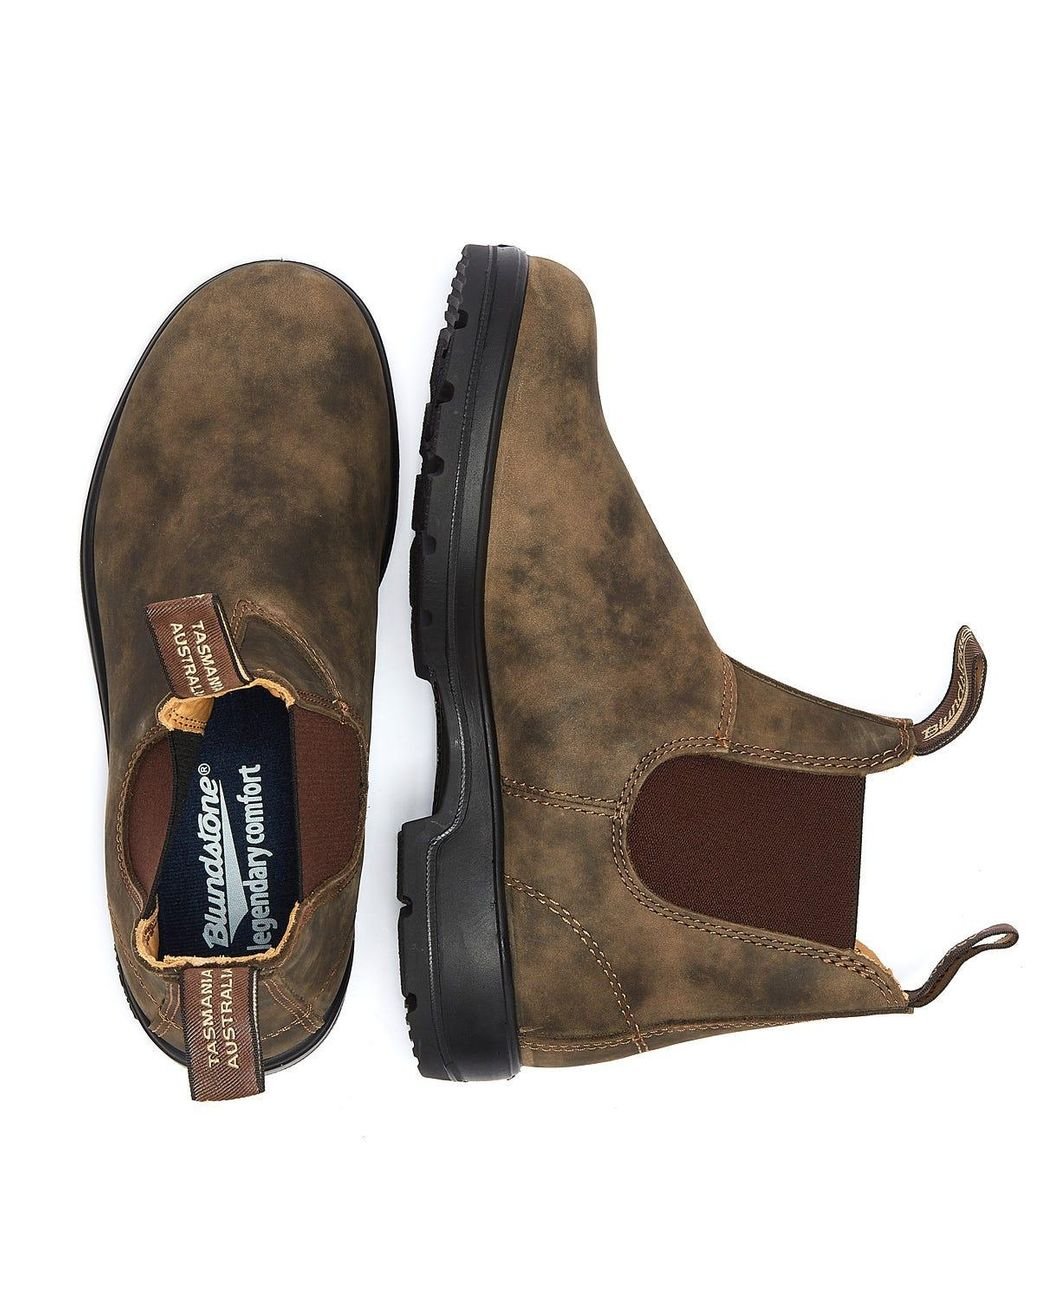 Blundstone 585 Rustic Brown - PLEASE CALL FOR SIZE AVAILABILITY